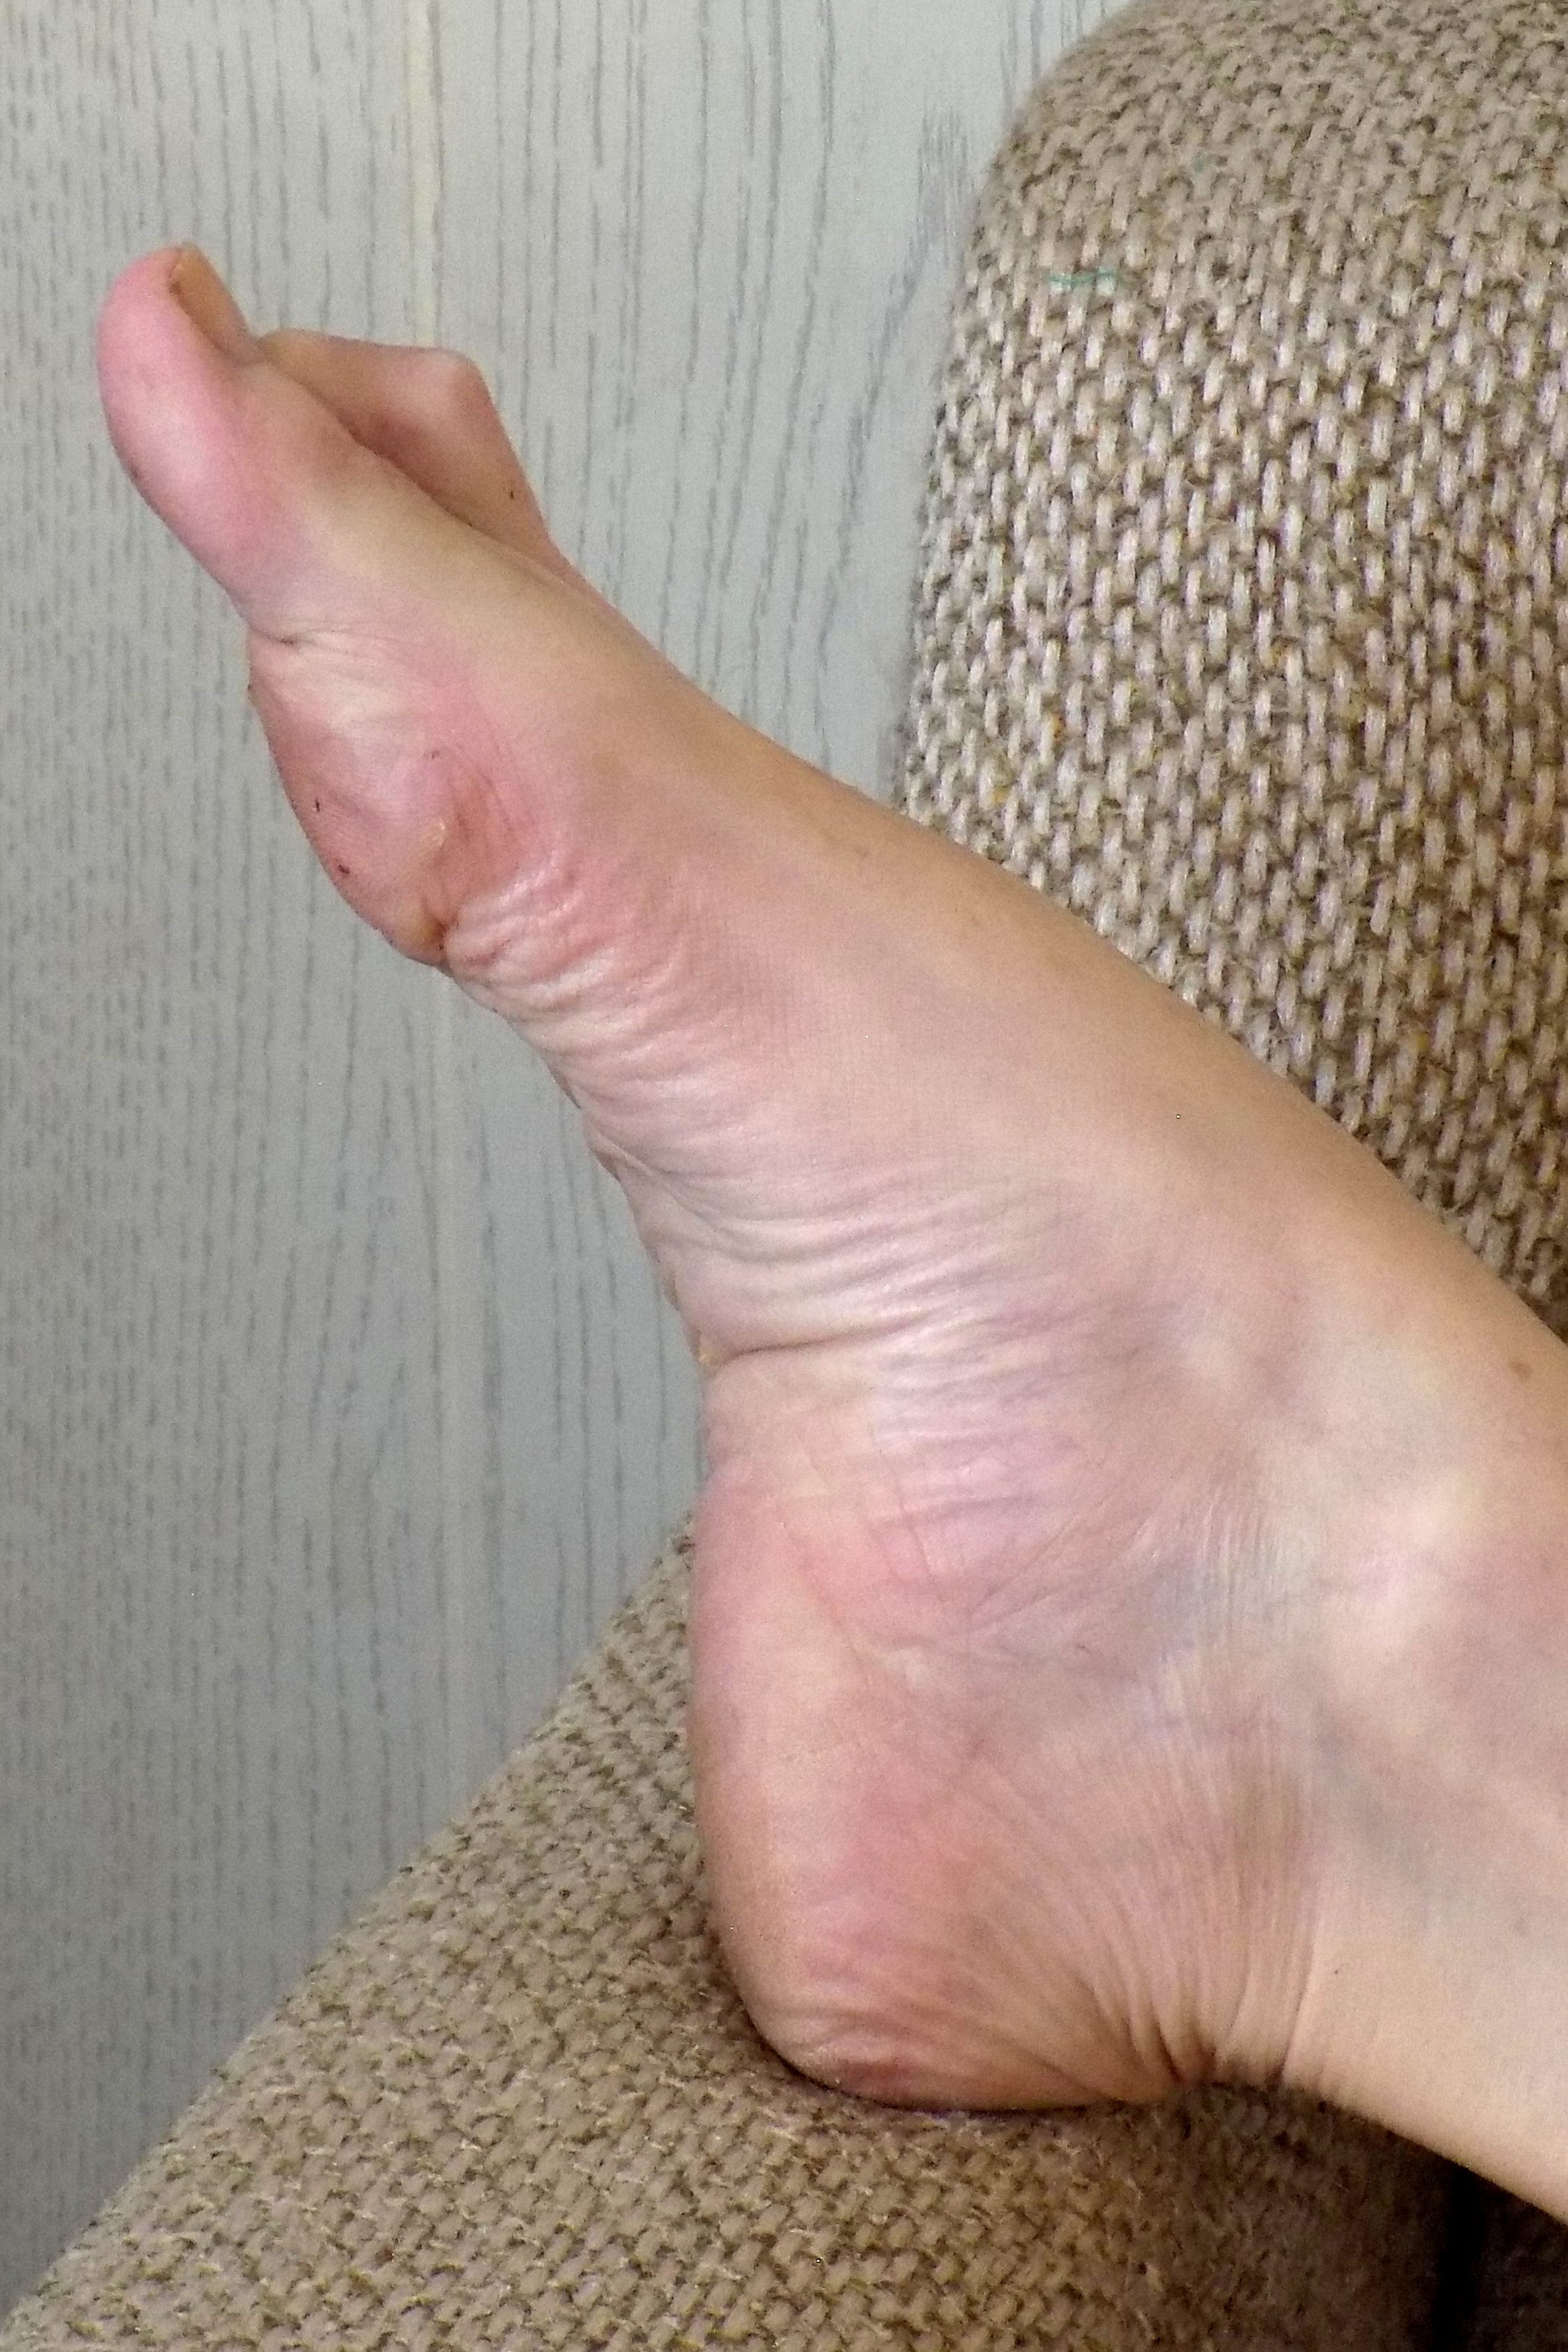 My sexy right foot posed extended resting on the arm of the couch